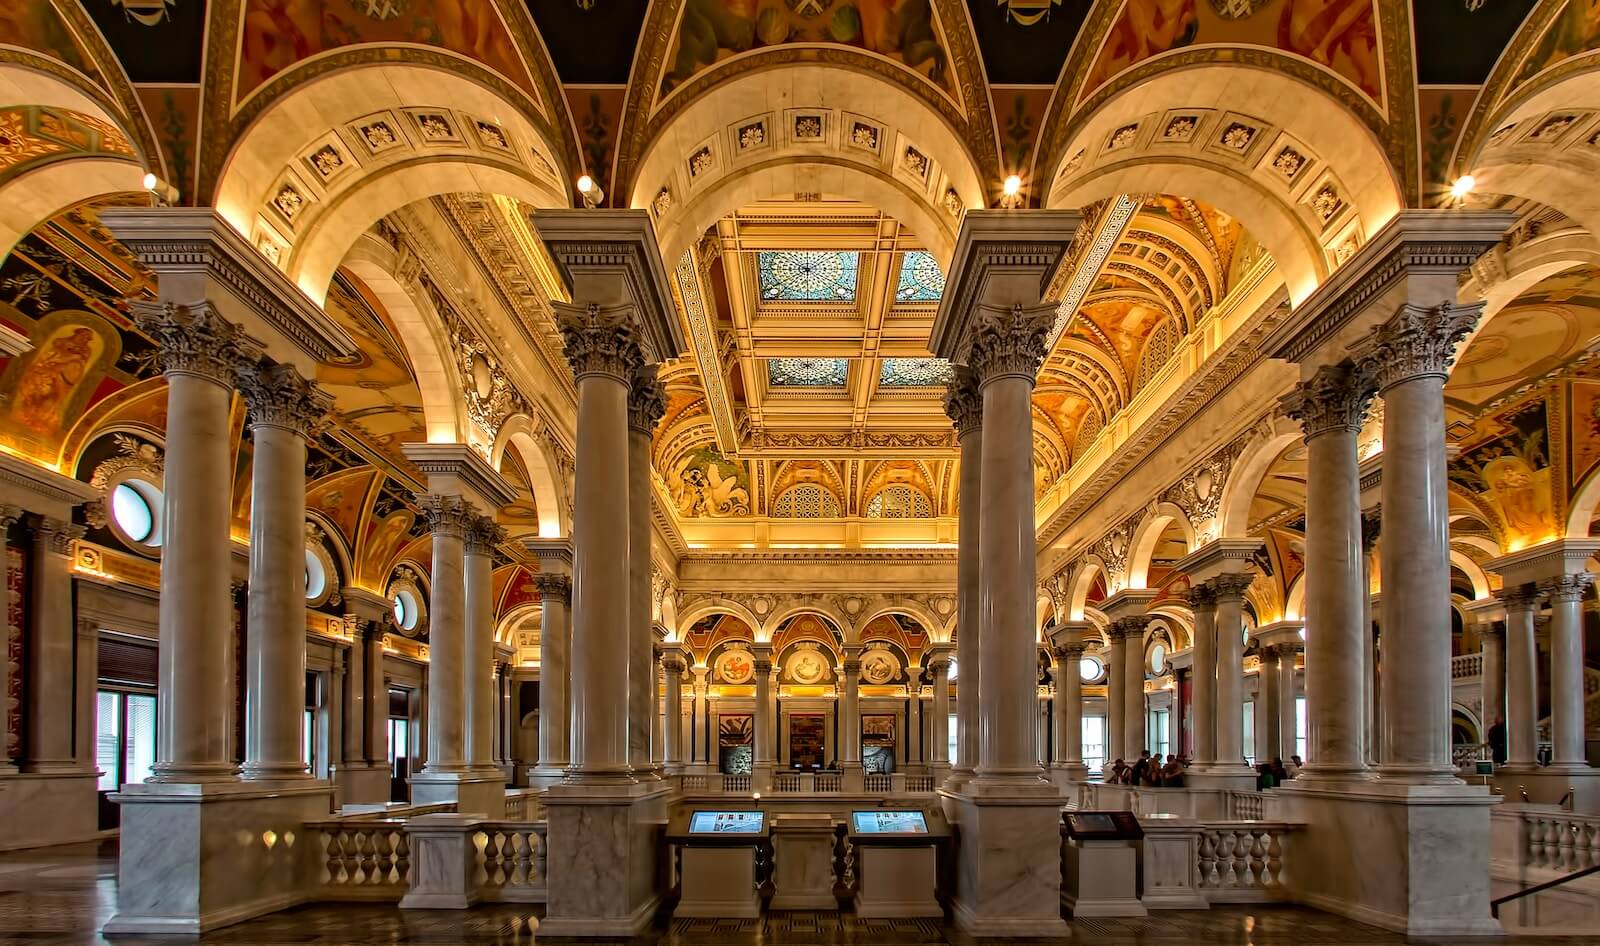 Library of Congress in Washington D.C.